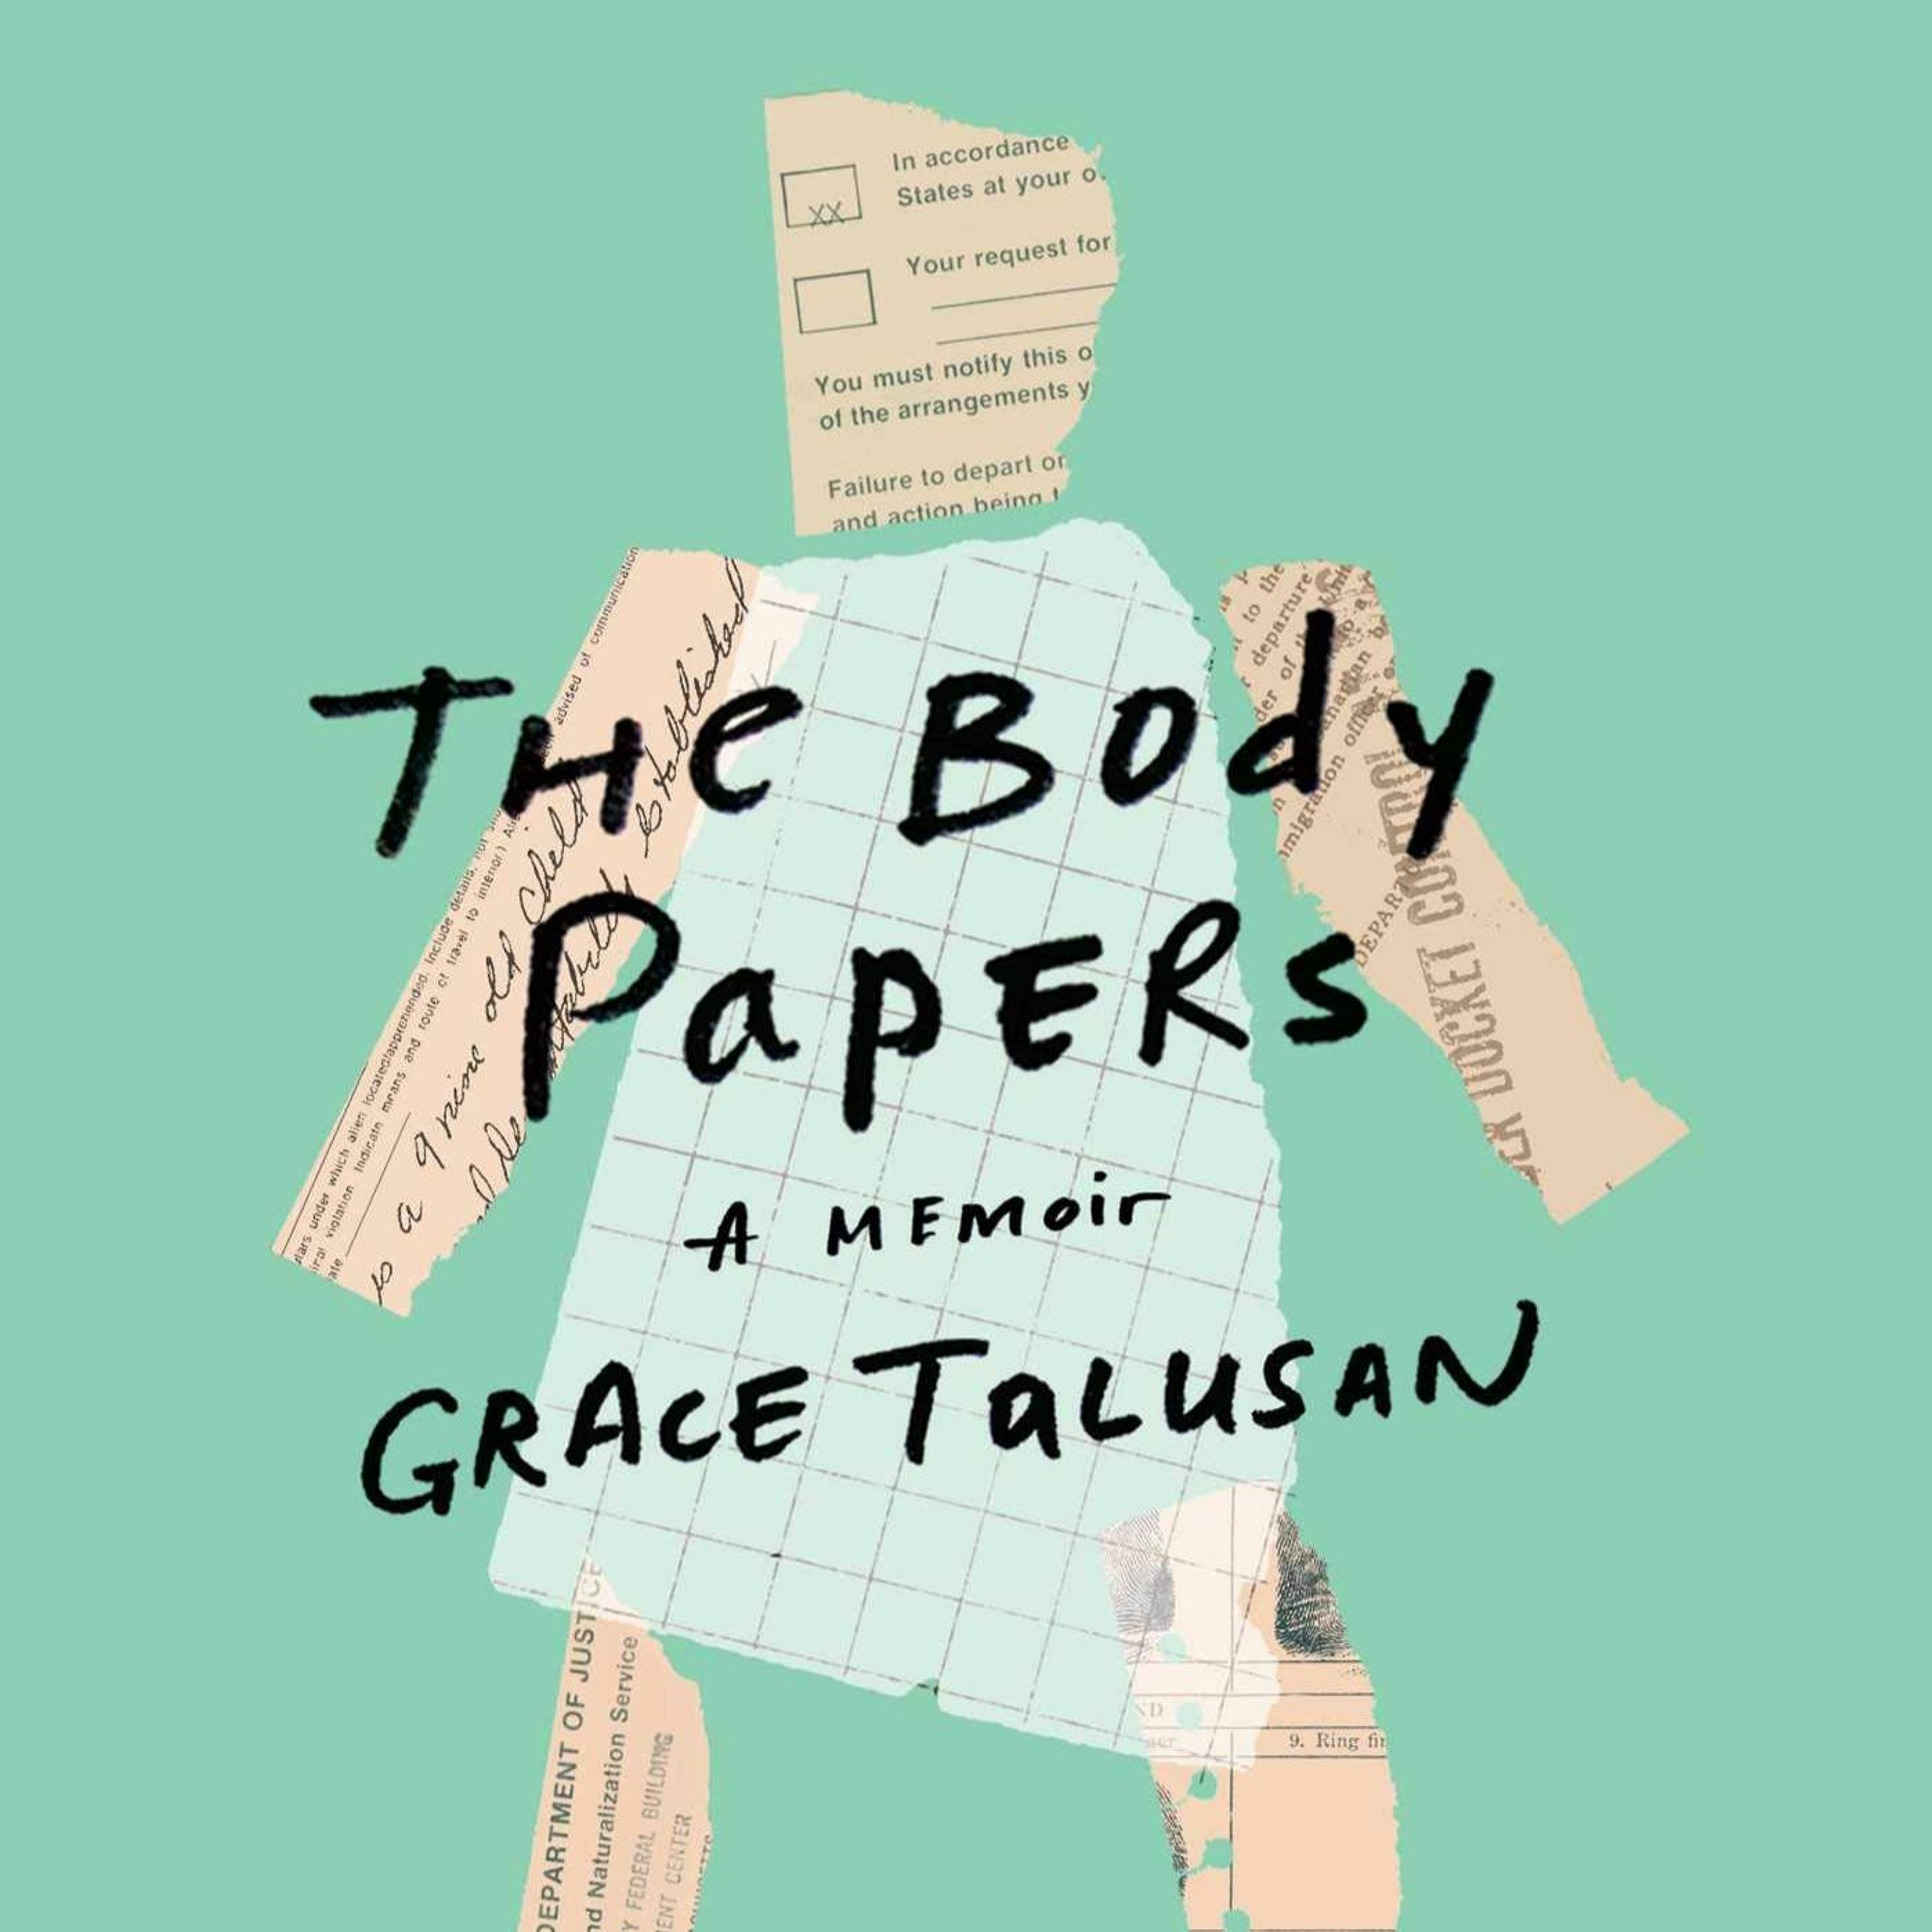 Grace Talusan and Elif Armbruster, “The Body Papers: A Memoir”